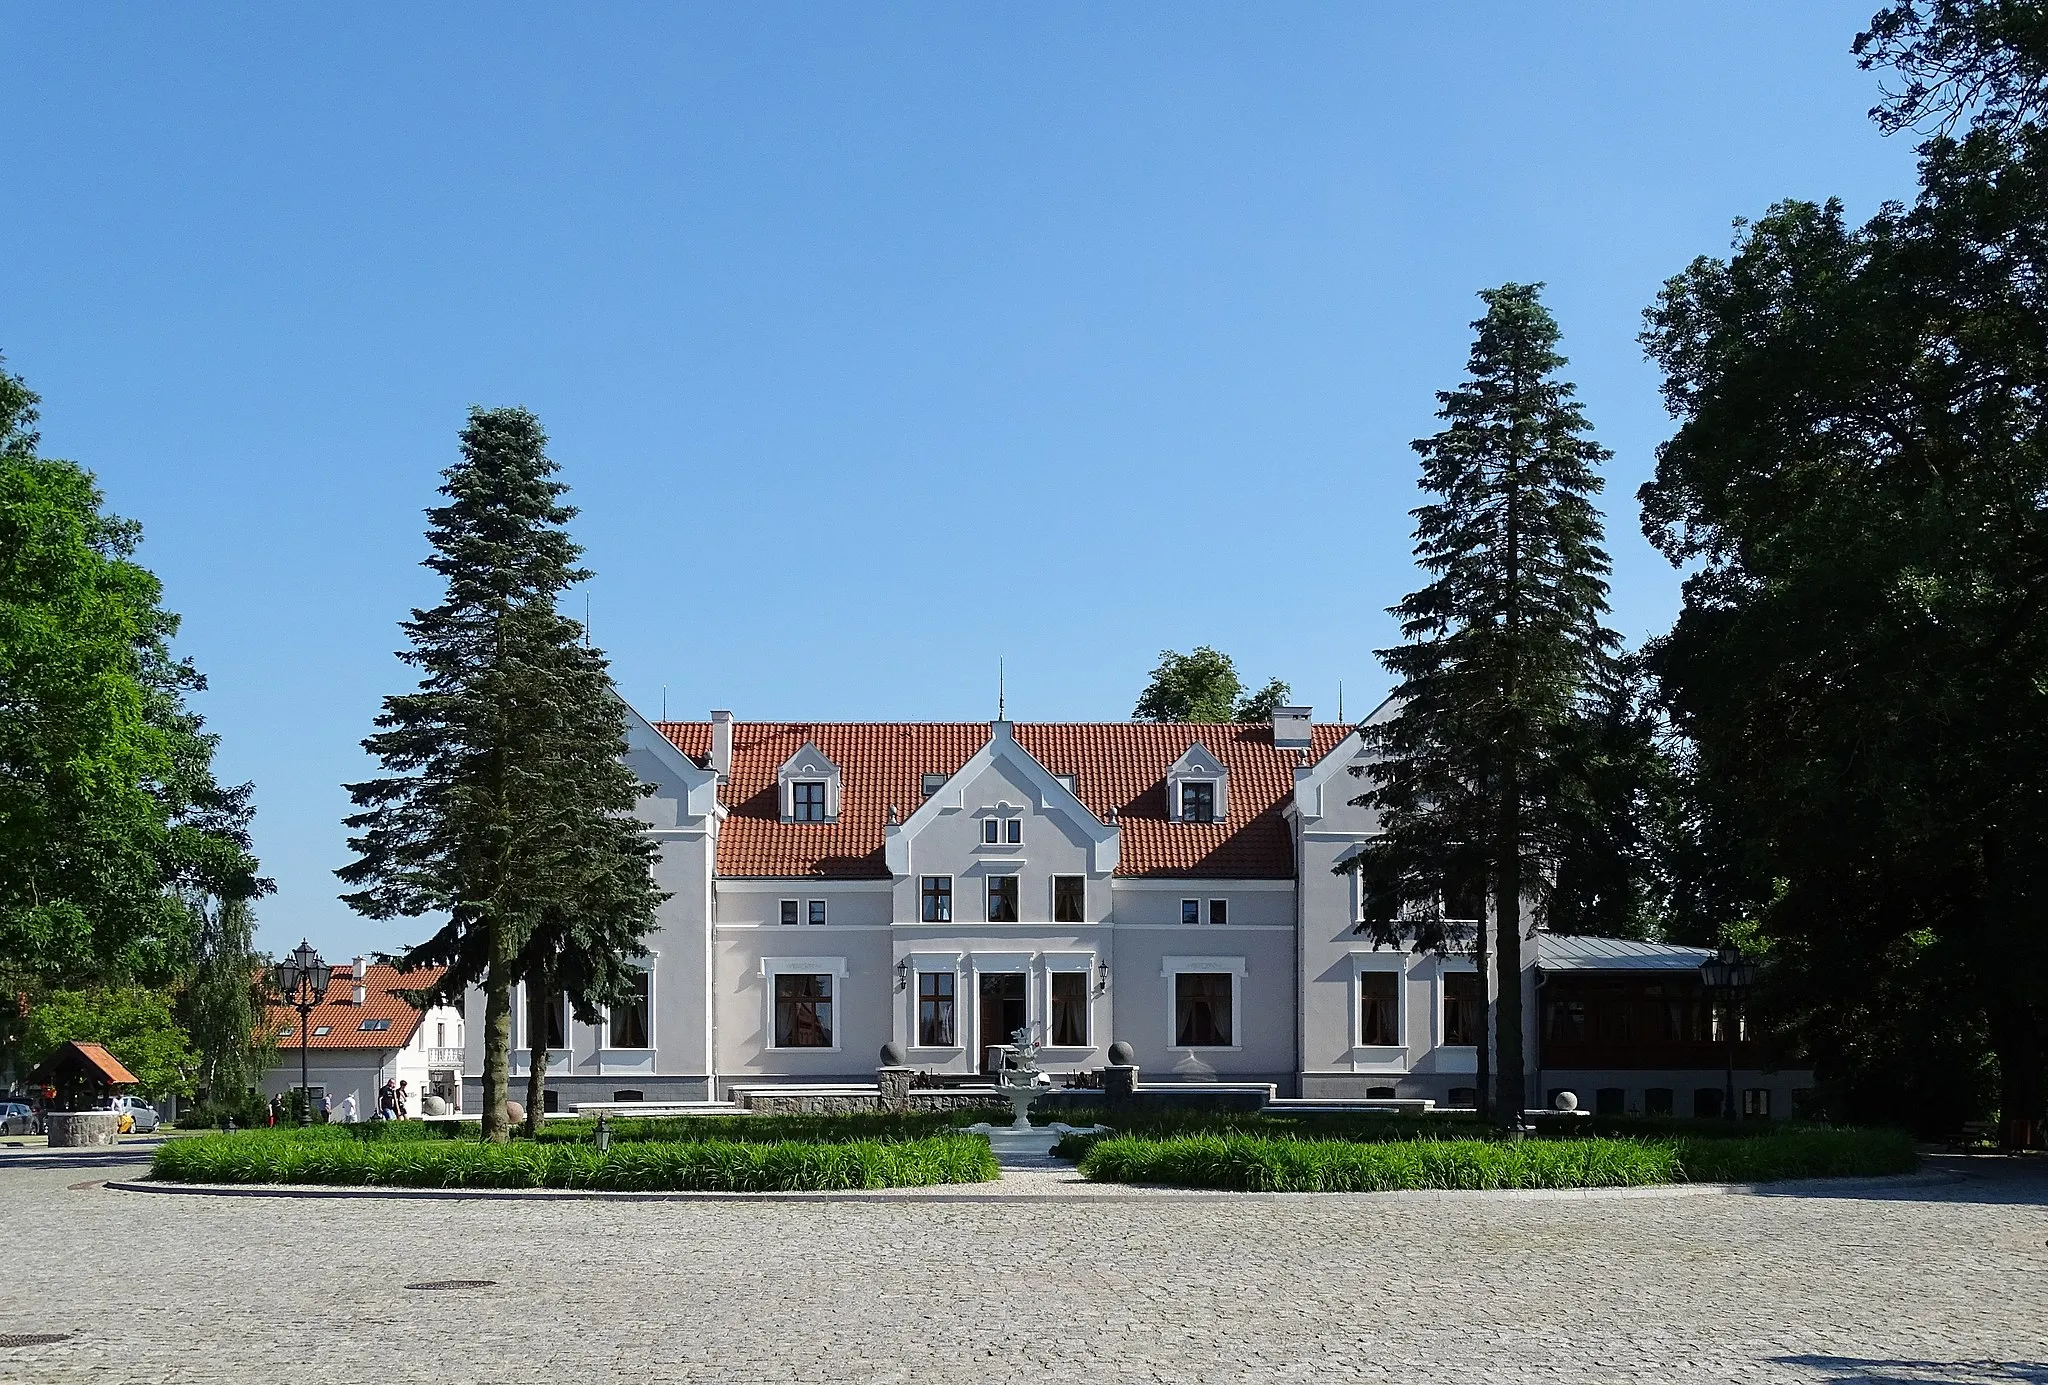 Photo showing: Manor house in Mortęgi, Gmina Lubawa, within Iława County, Warmian-Masurian Voivodeship, Poland. Built in the mid-nineteenth century. It is now used as a hotel and spa.